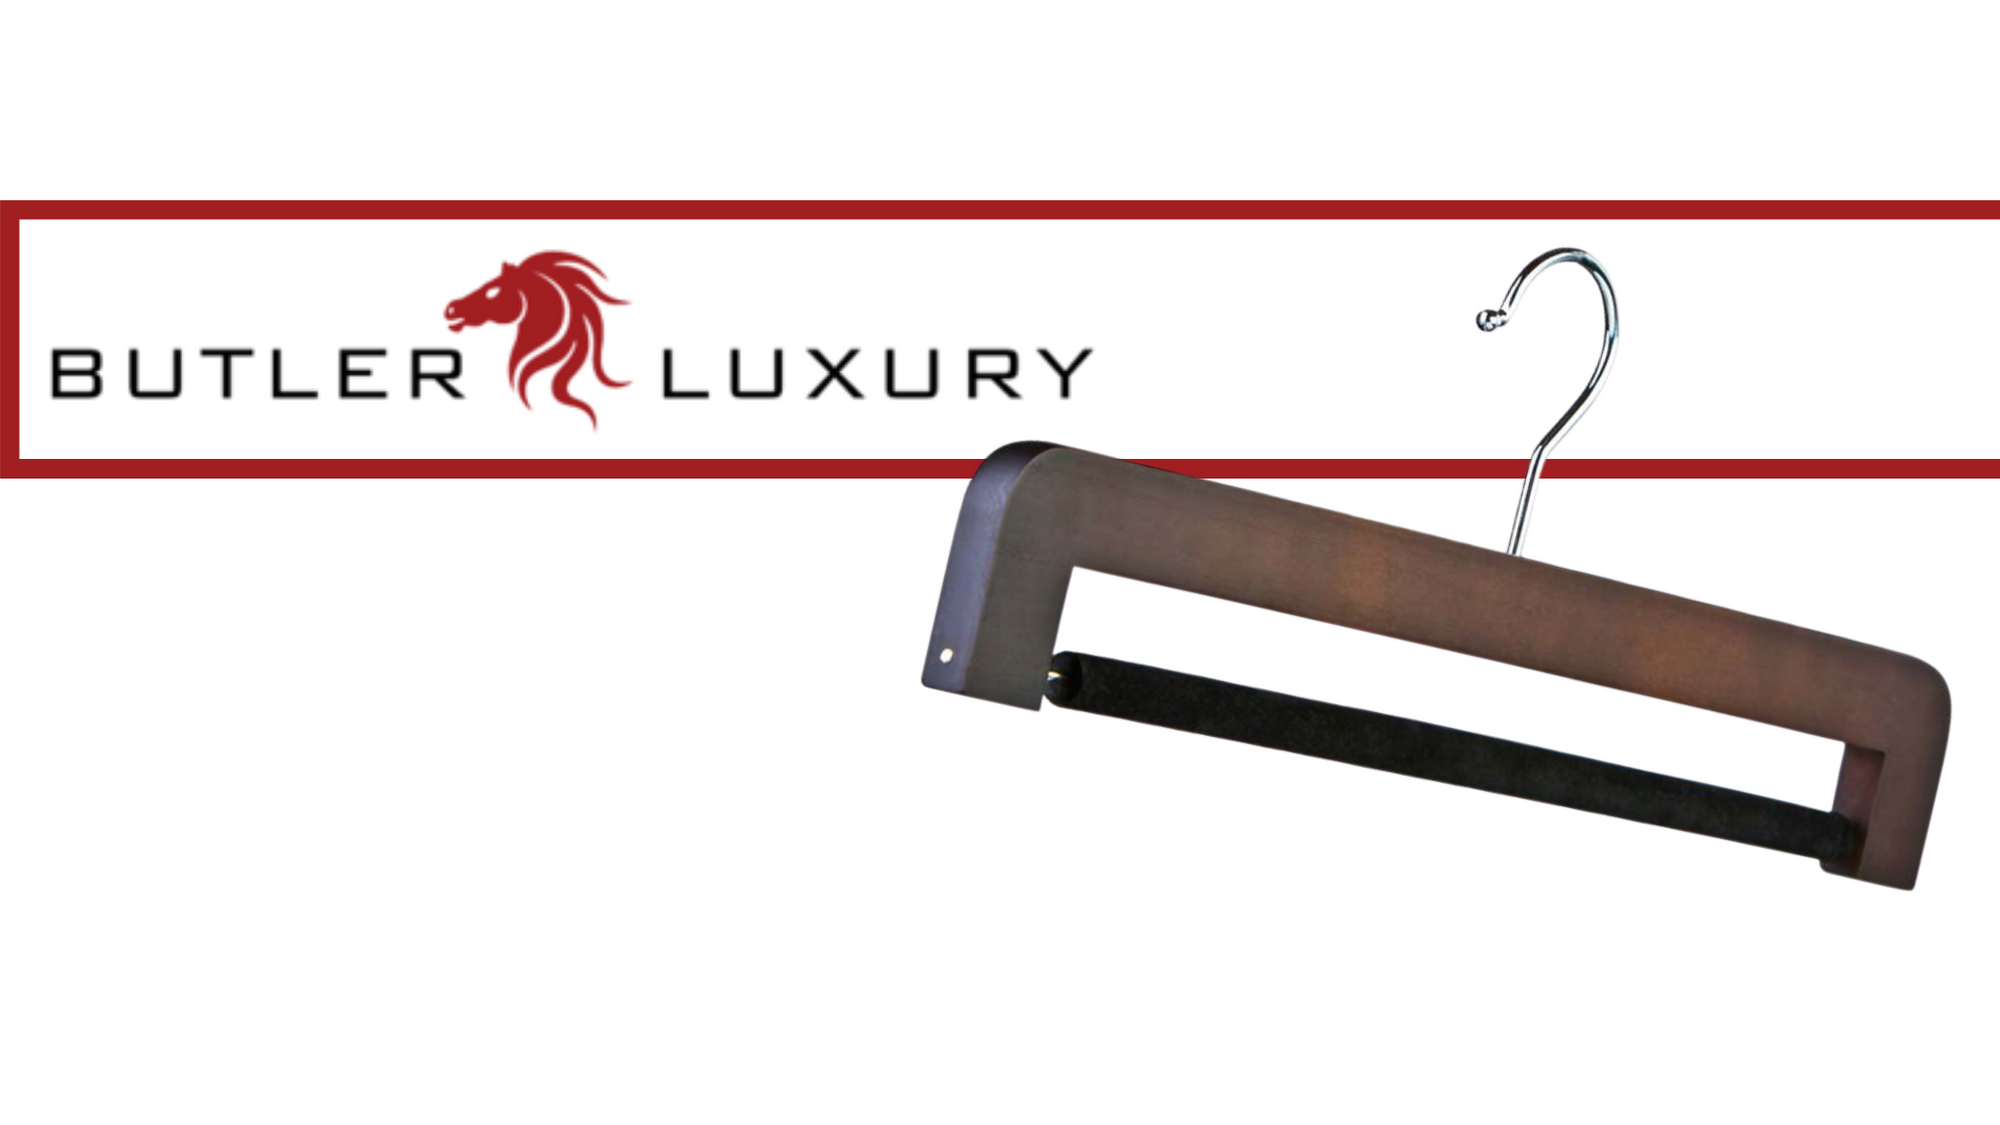 What Makes Butler Luxury Pants Hangers Different?